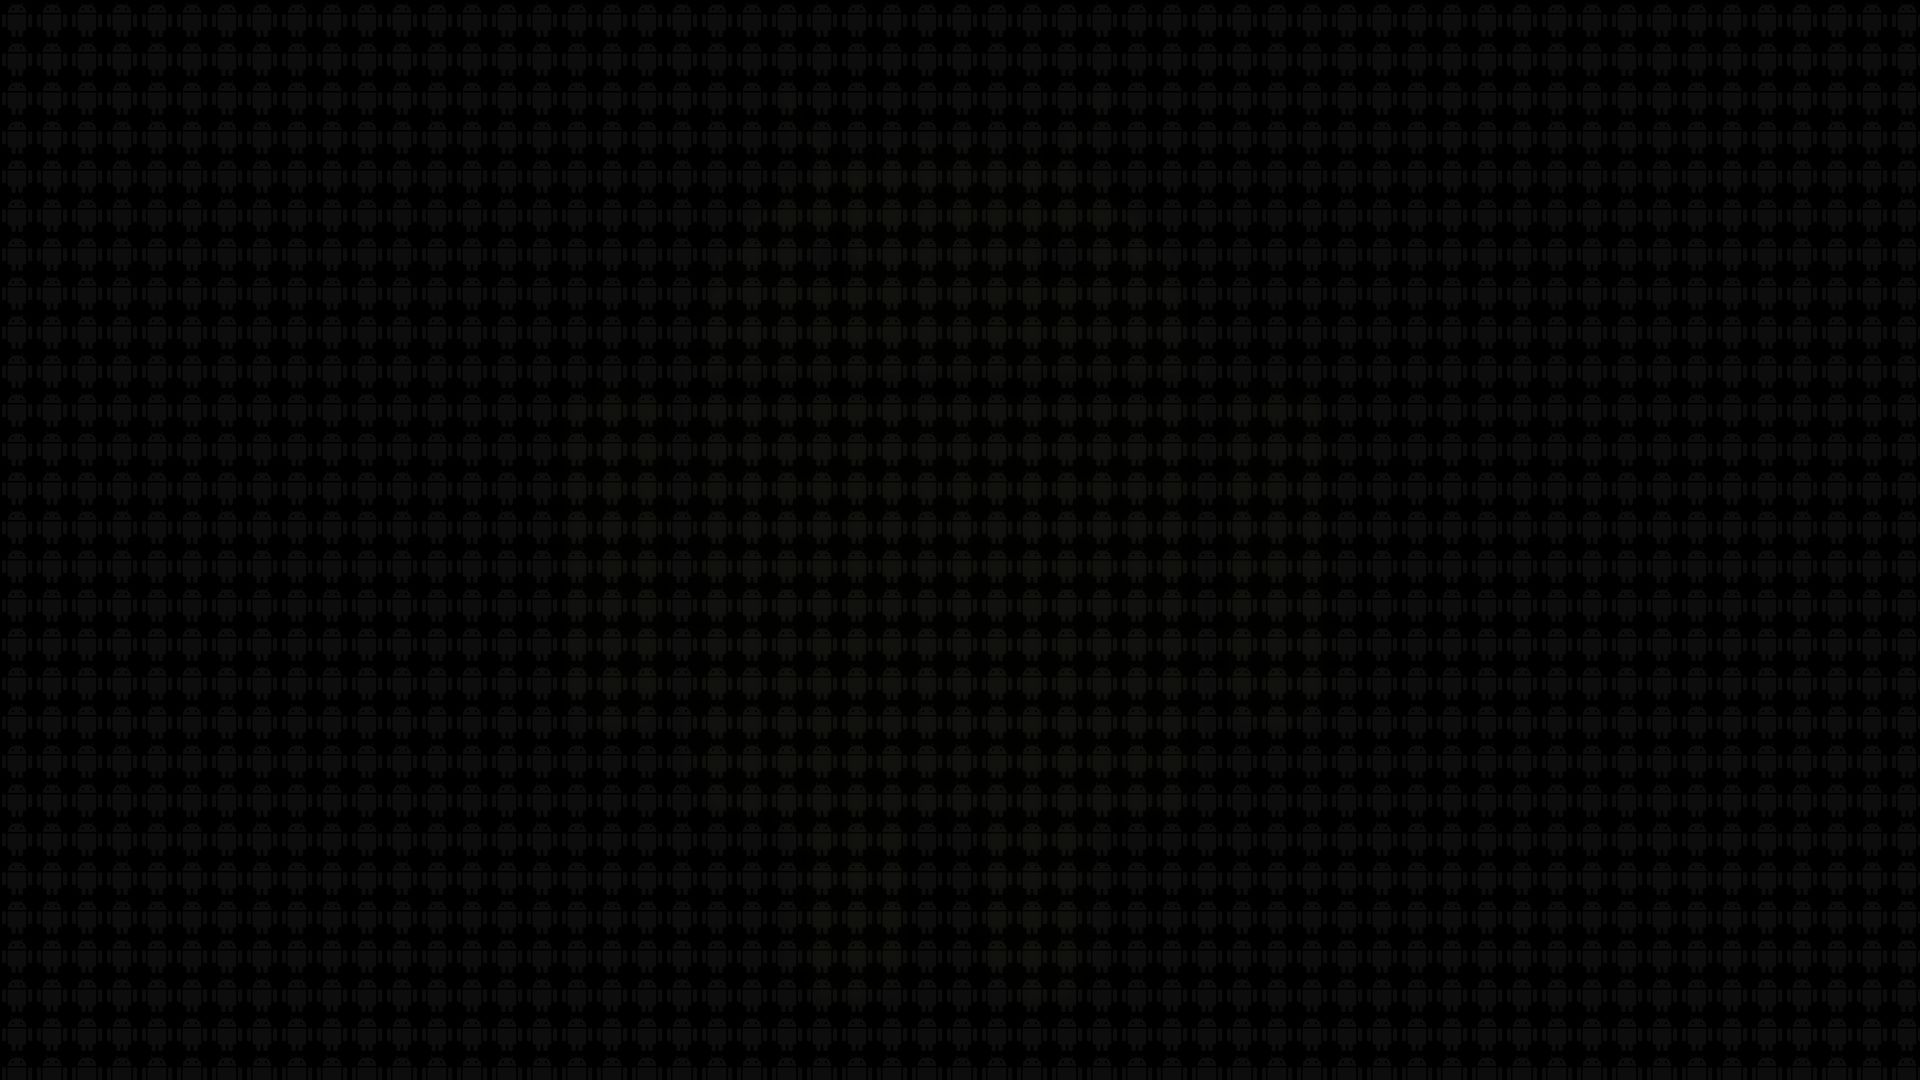 All Black Wallpaper Android Page 1